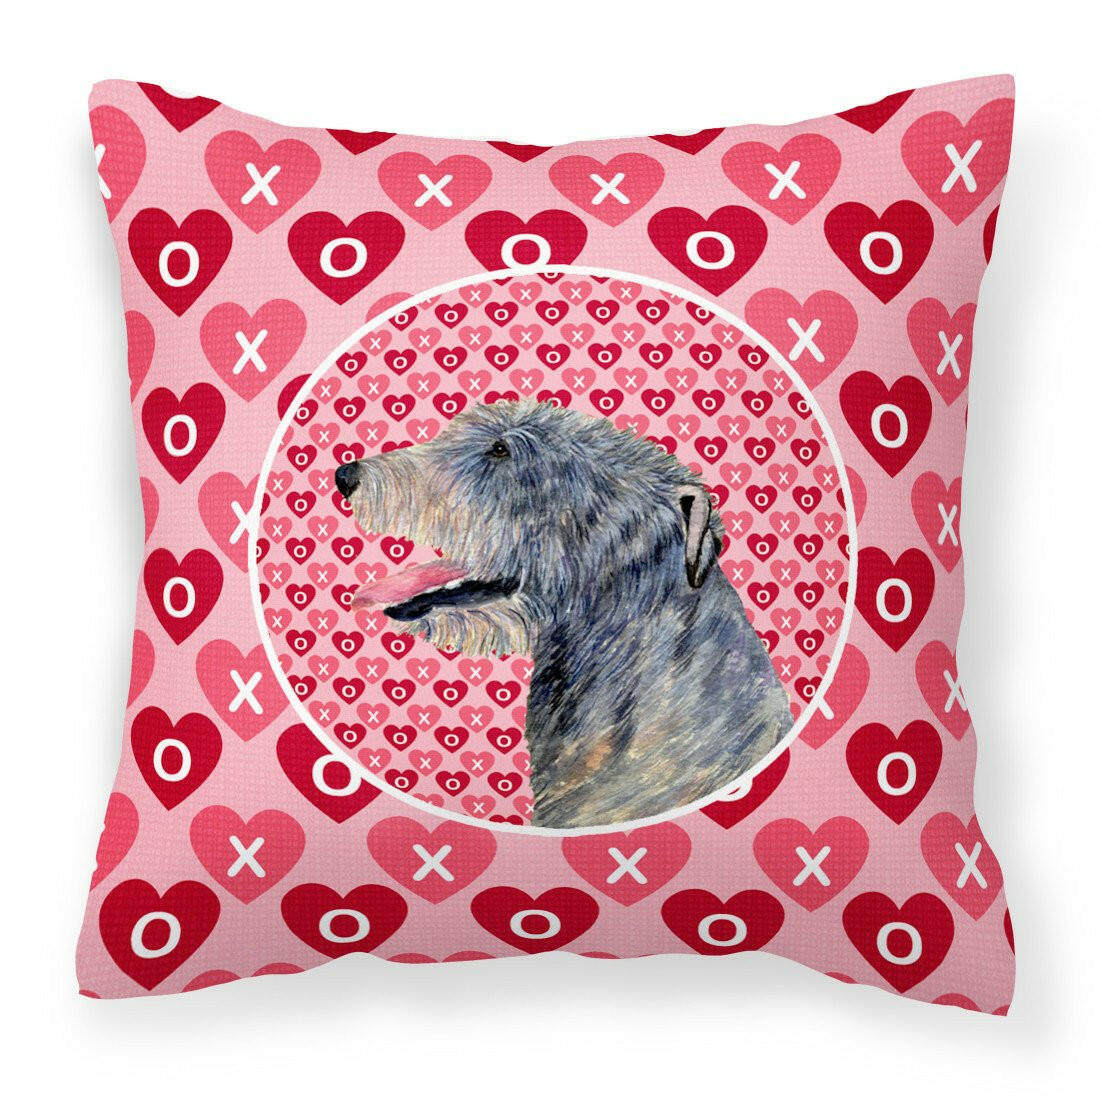 Irish Wolfhound Hearts Love and Valentine's Day Portrait Fabric Decorative Pillow SS4506PW1414 by Caroline's Treasures